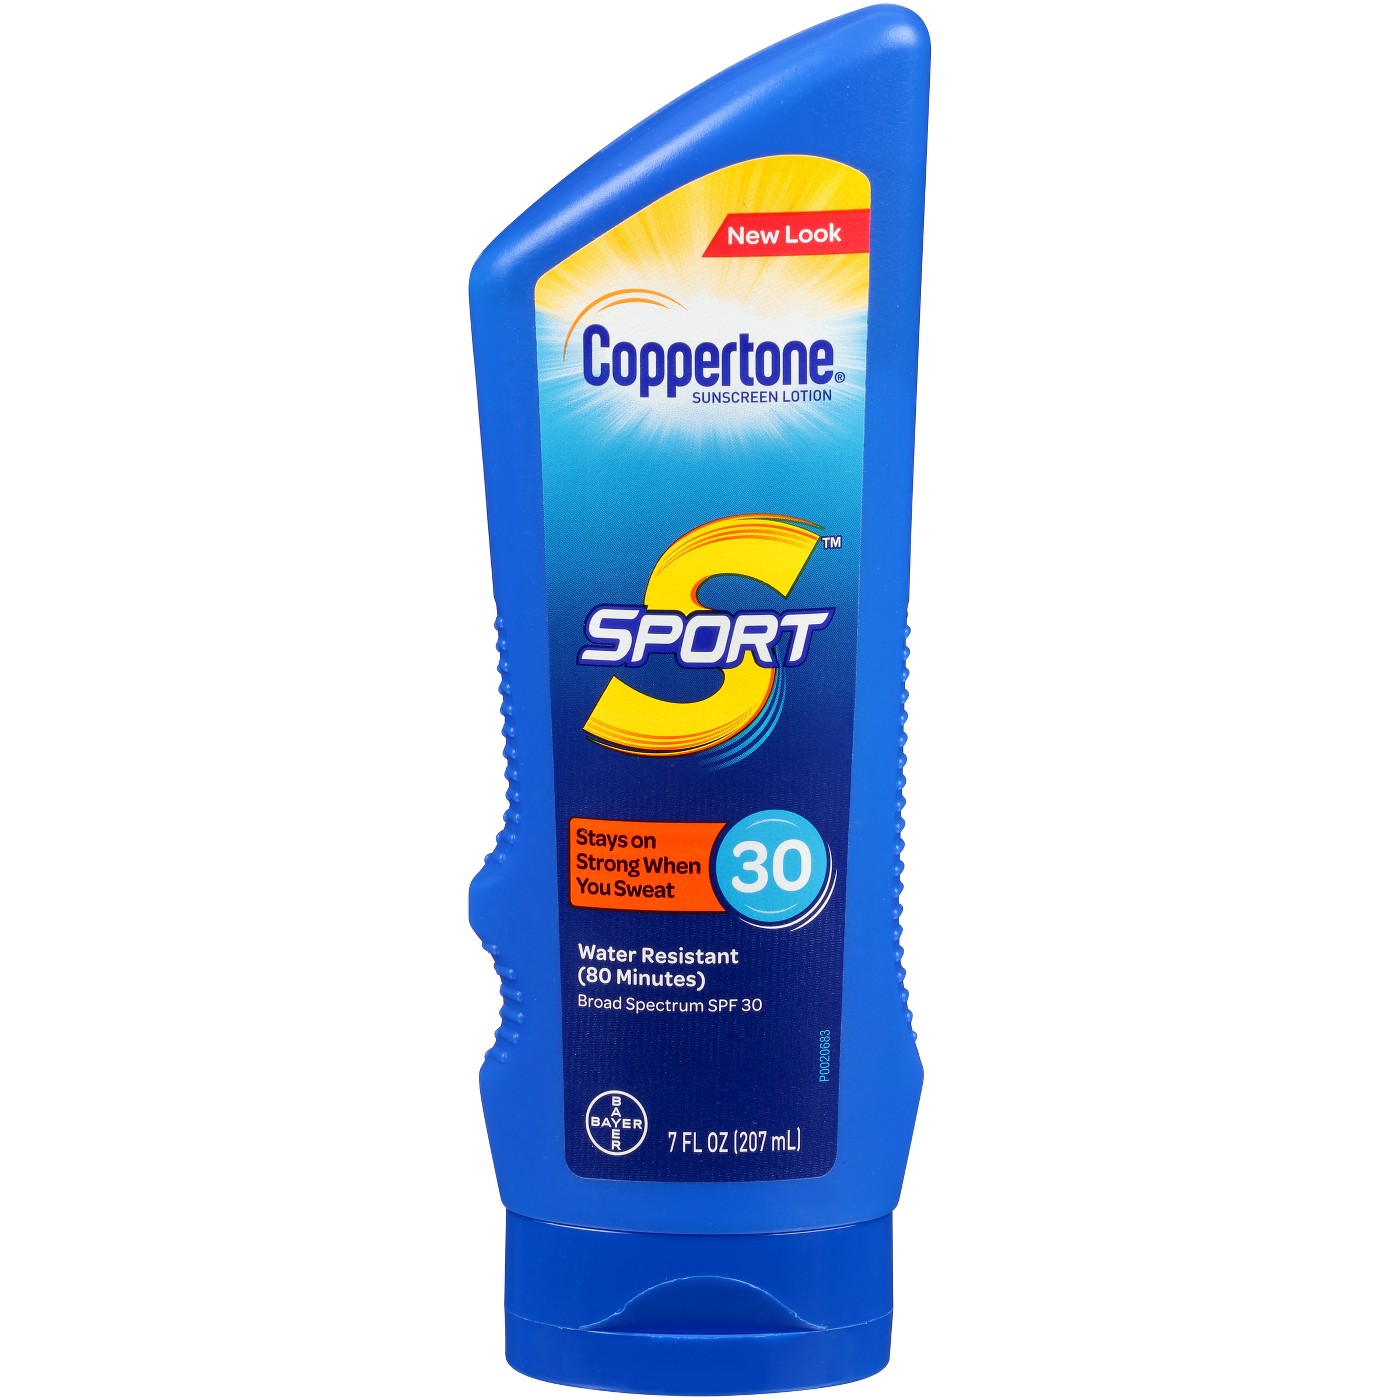 Save $4 on any 2 Coppertone sunscreen products with coupon plus $5 GC